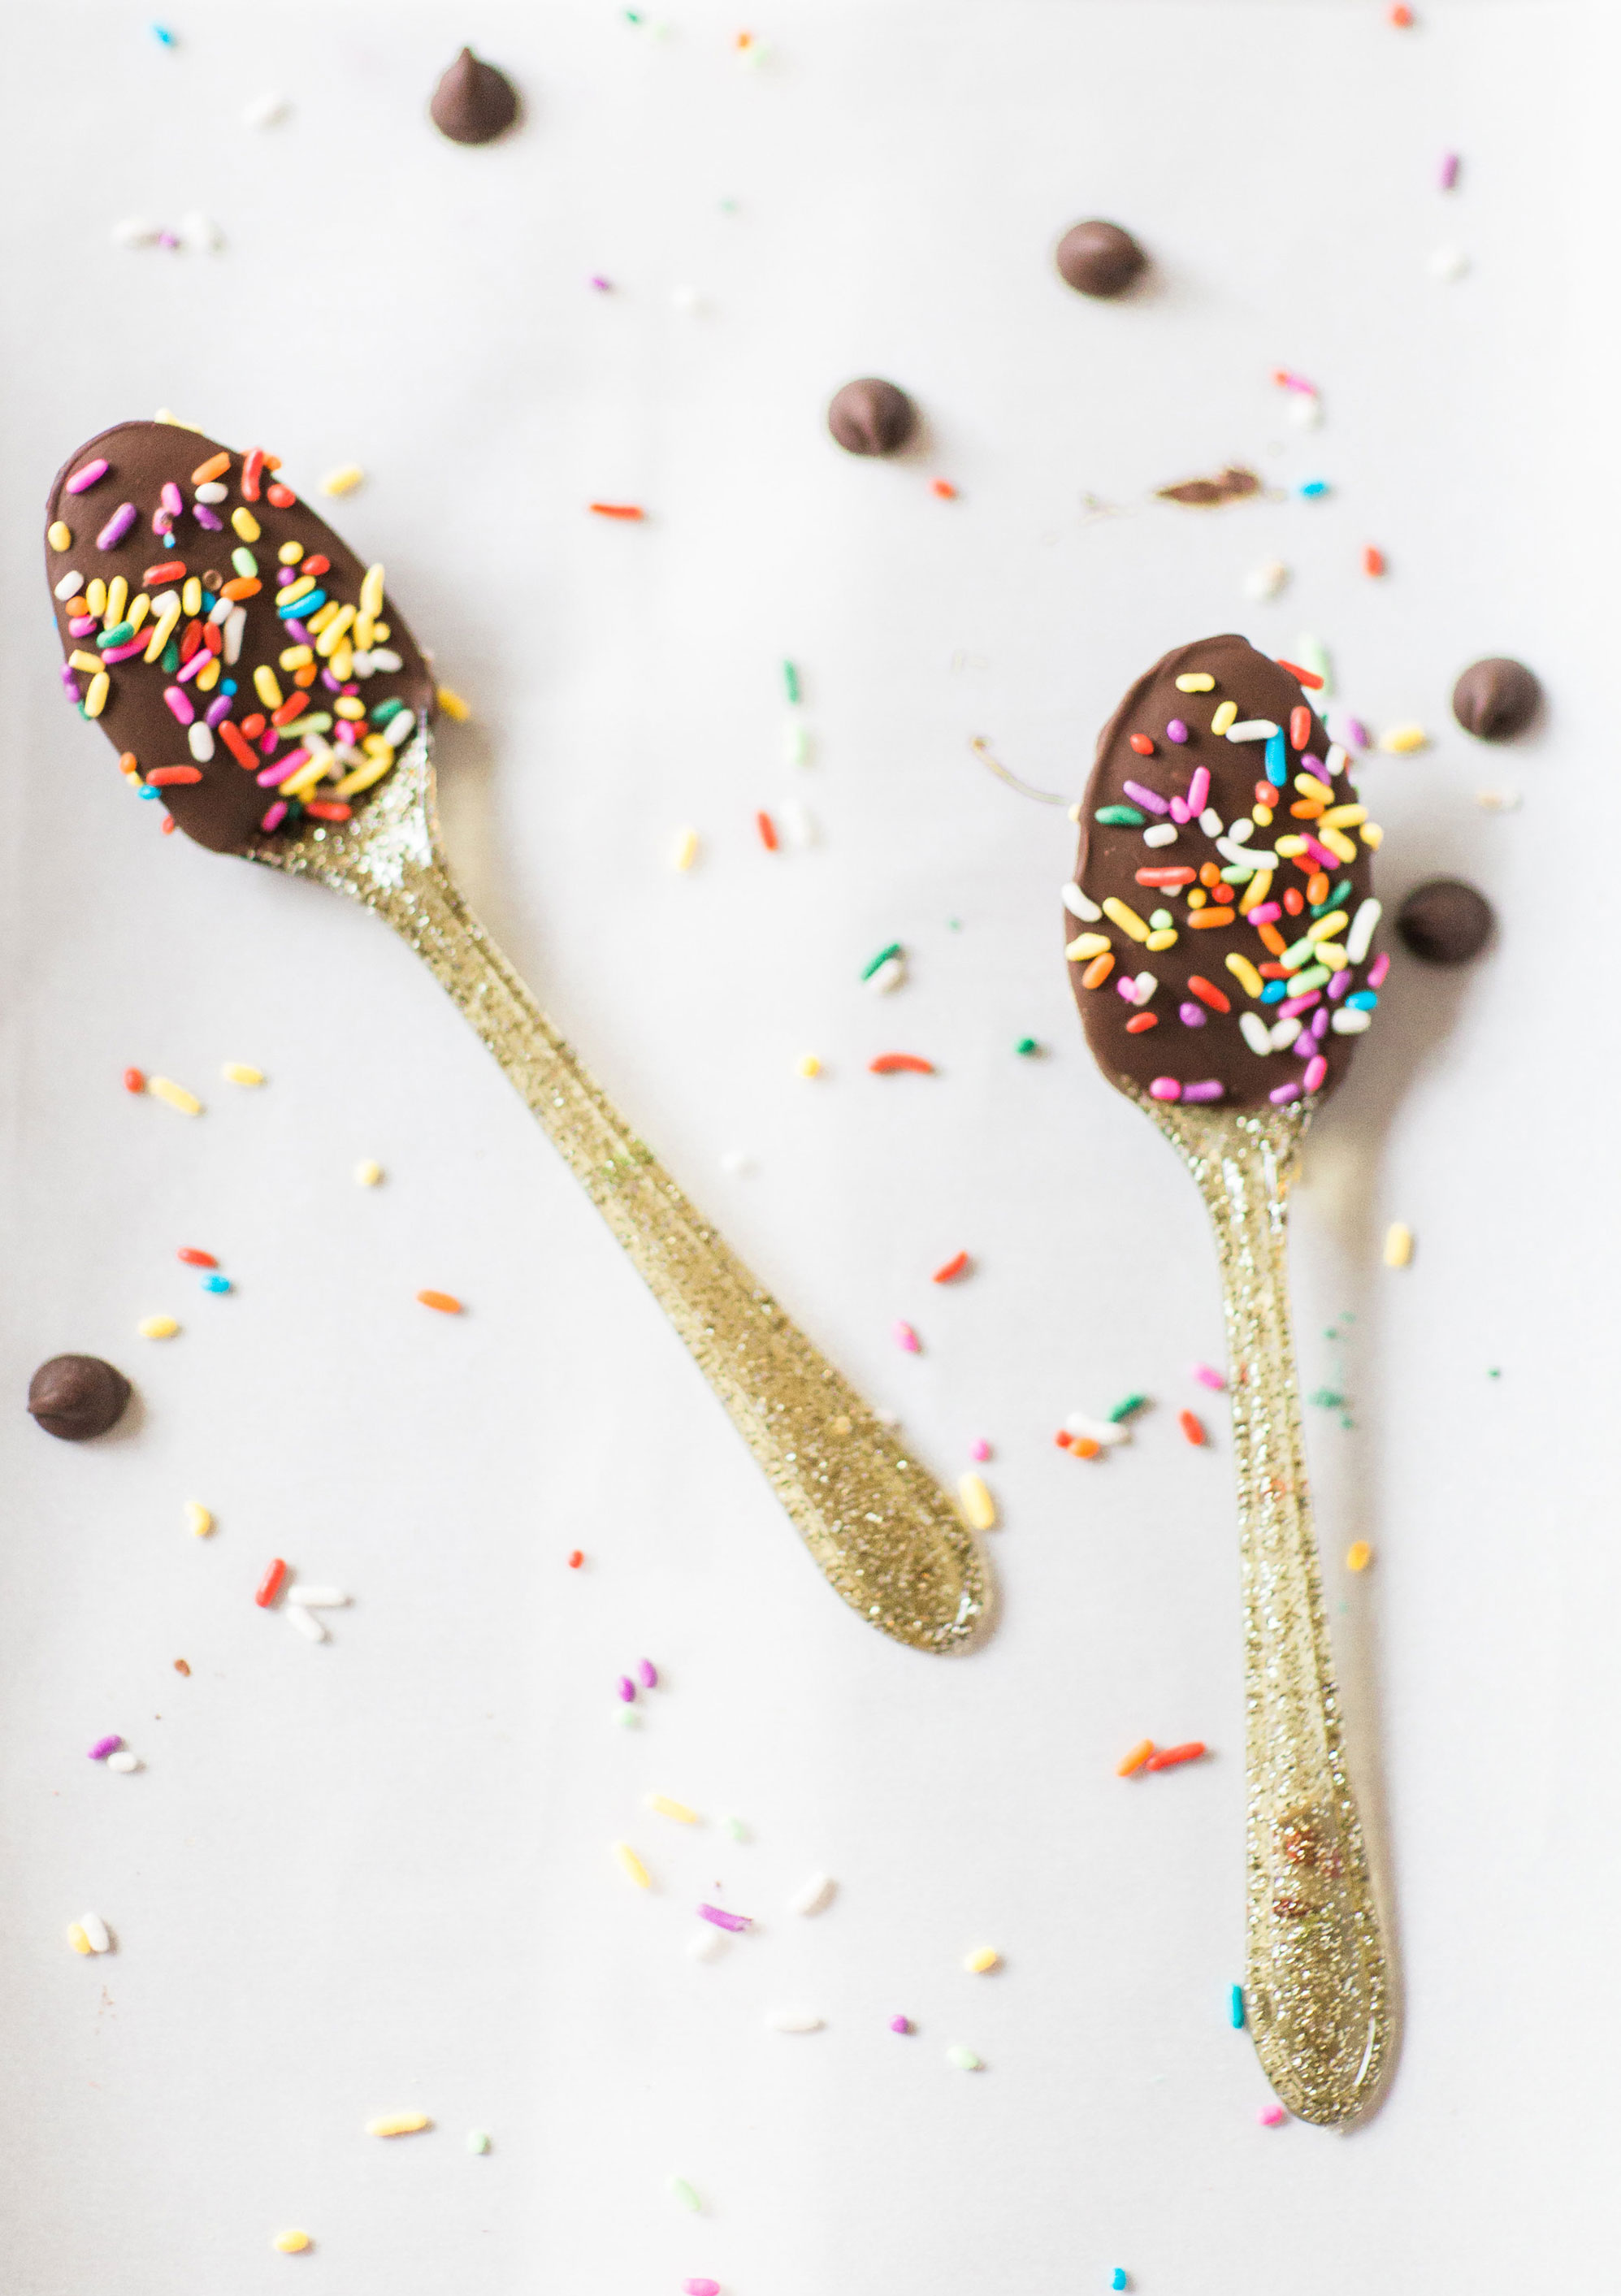 How to make an almond milk chocolate glazed donut coffee with chocolate-dipped sprinkle spoons. Click through for the details. | glitterinc.com | @glitterinc